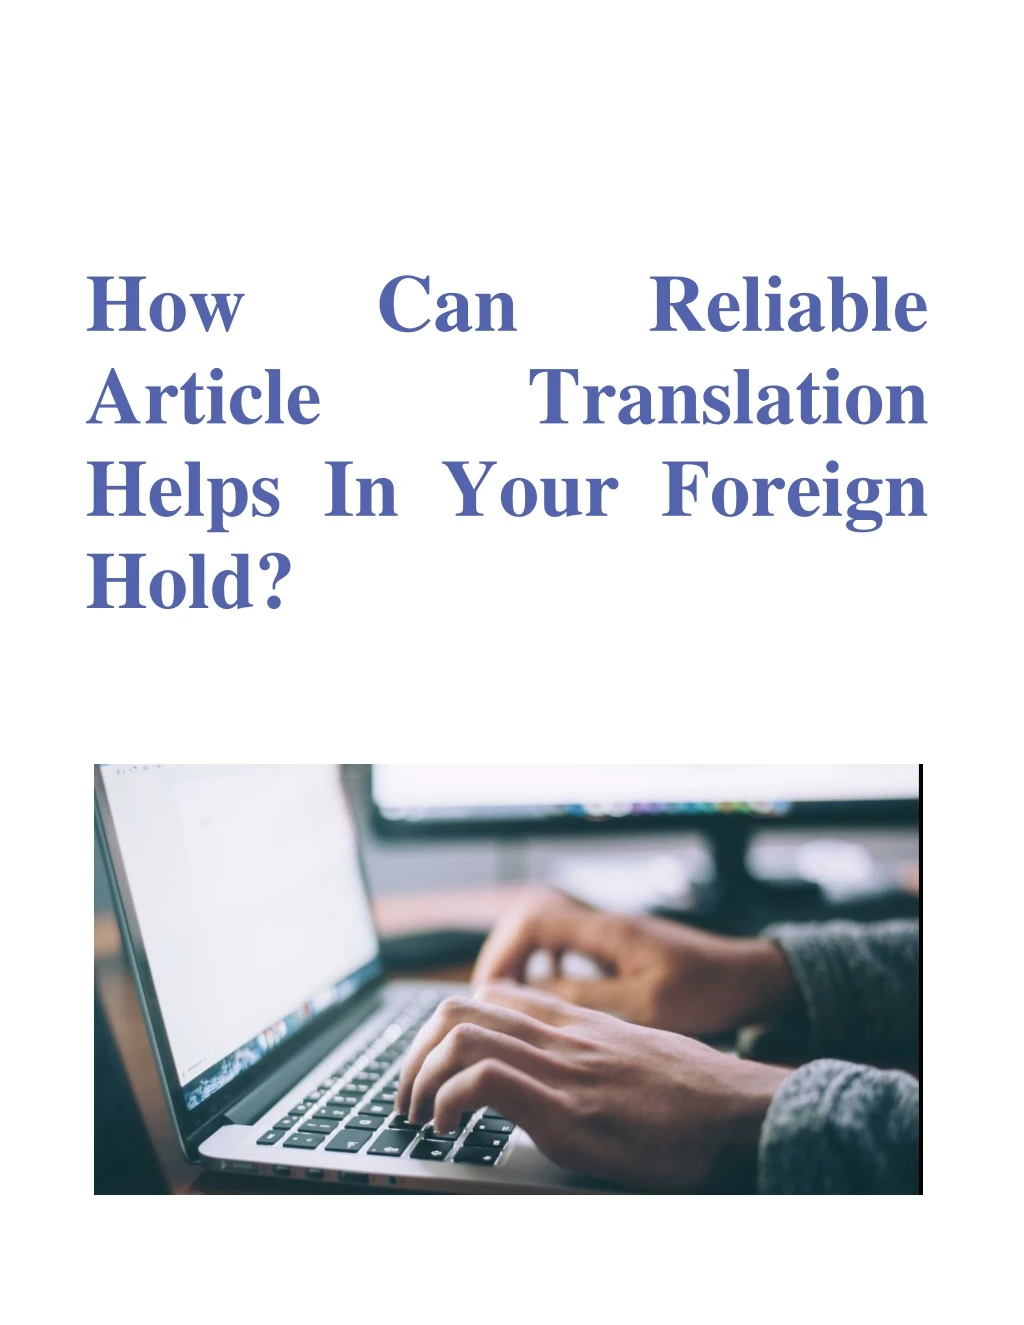 how article helps in your foreign hold